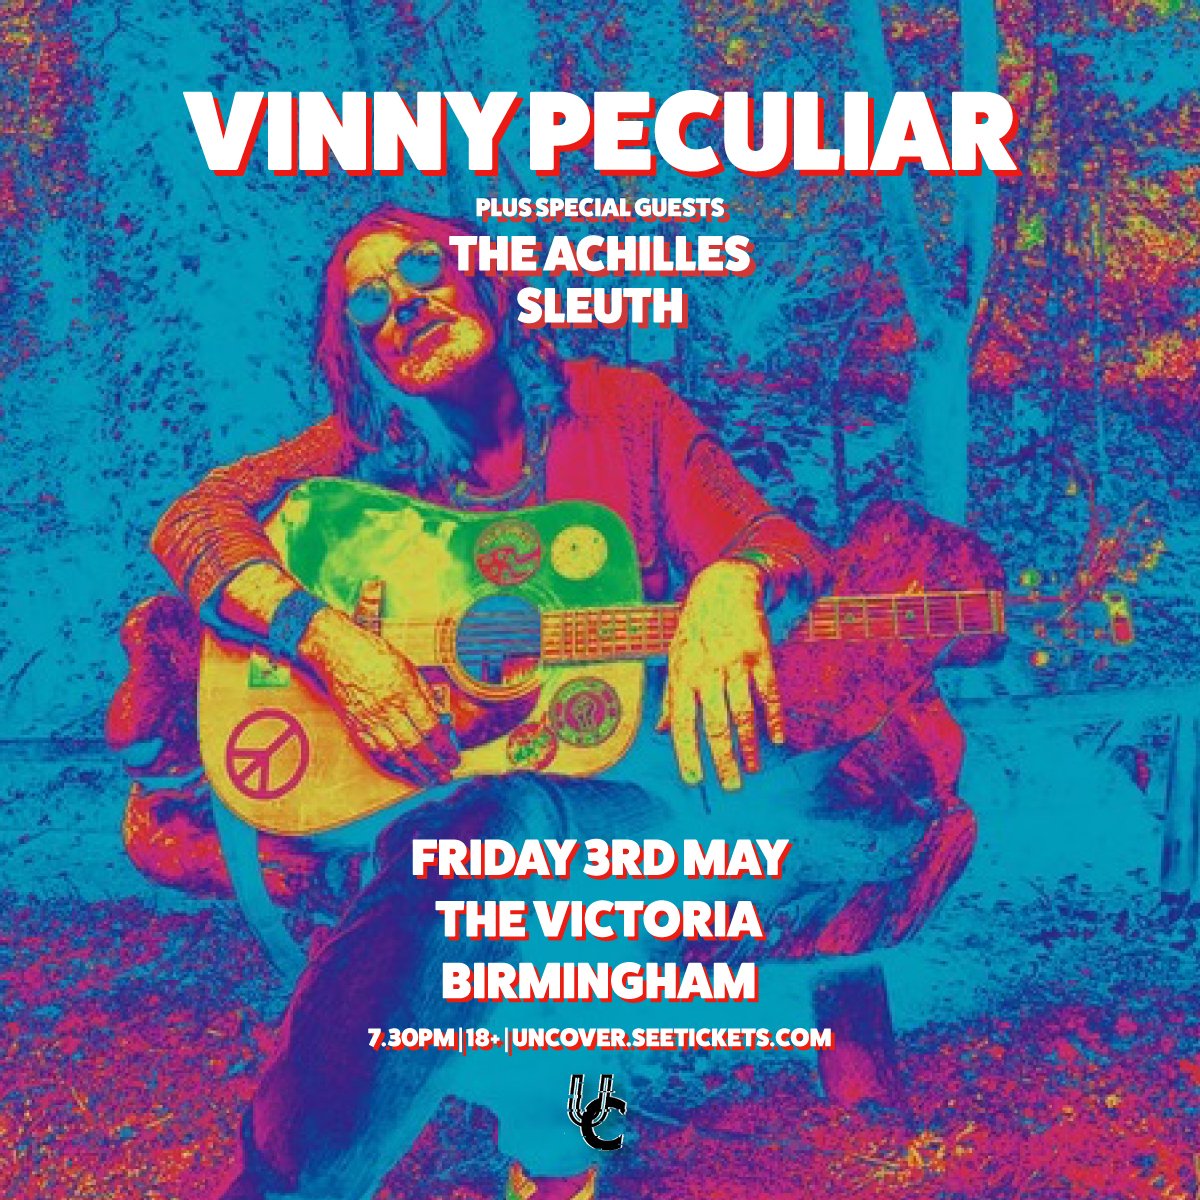 Extremely chuffed to be playing Sleuth full band supporting the legendary @vinnypeculiar at The Victoria in May courtesy of @Uncover_Night. This is gigantically exciting...get tickets before it sells out! uncover.seetickets.com/event/vinny-pe… See you there x #vinnypeculiar #birmingham